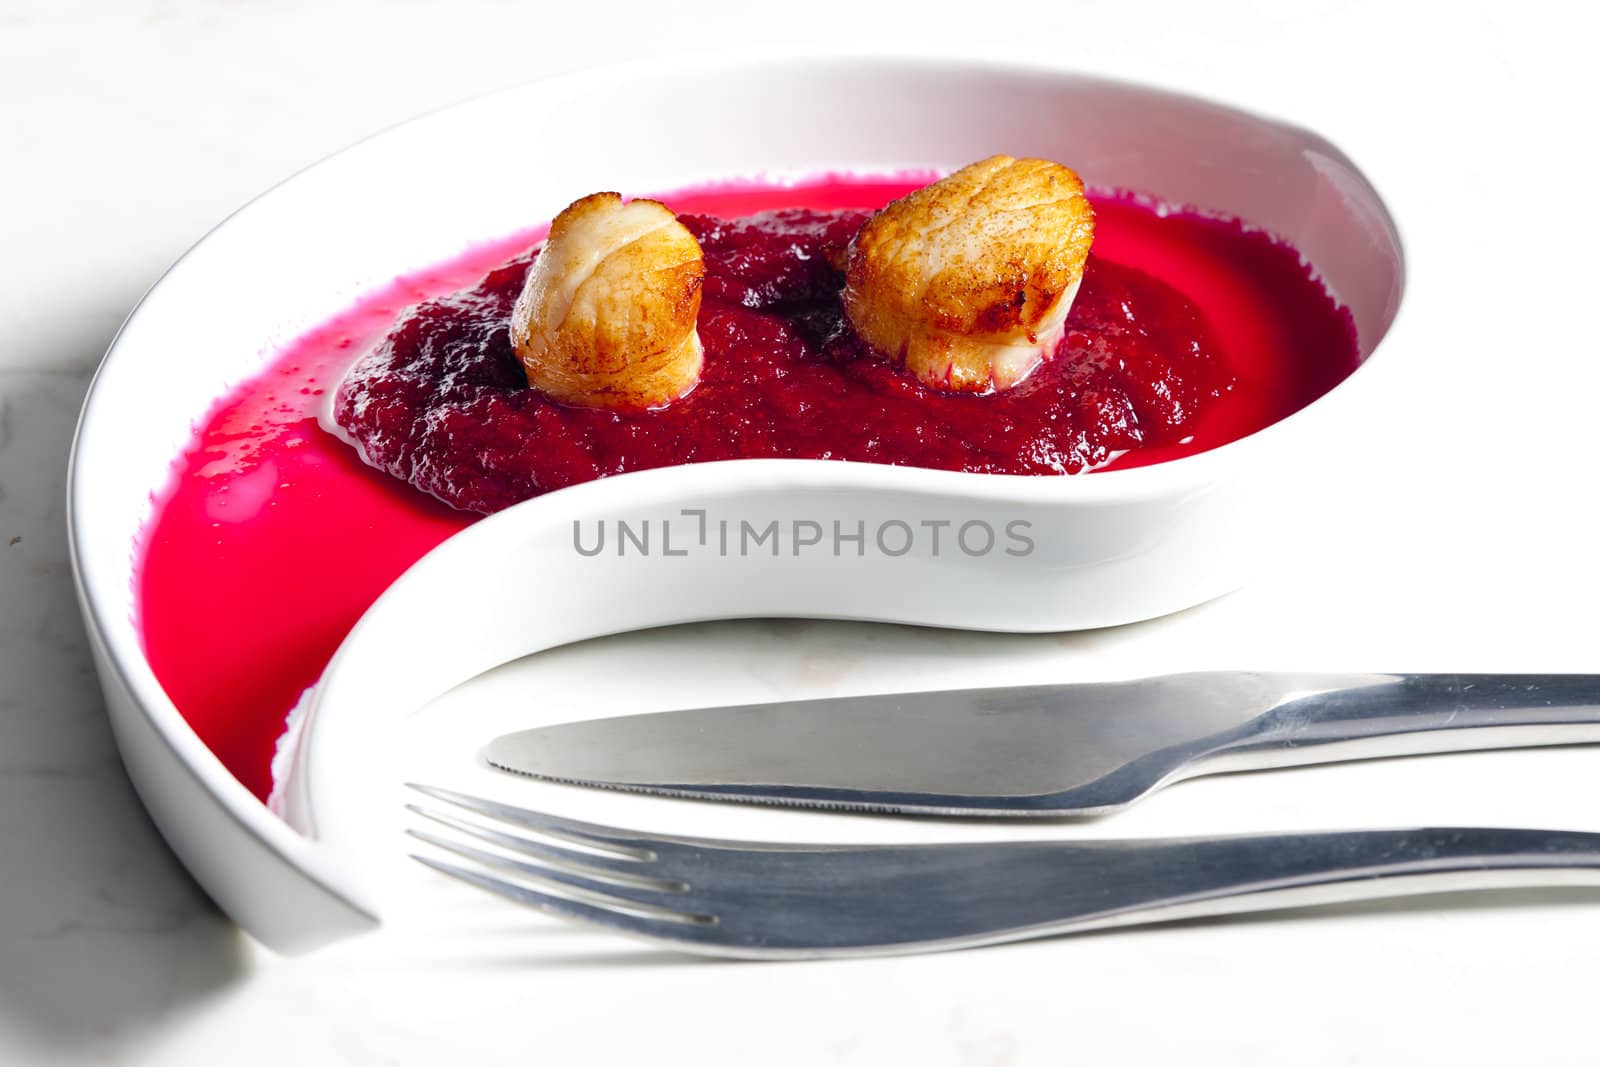 fried Saint Jacques molluscs on mashed red beet by phbcz